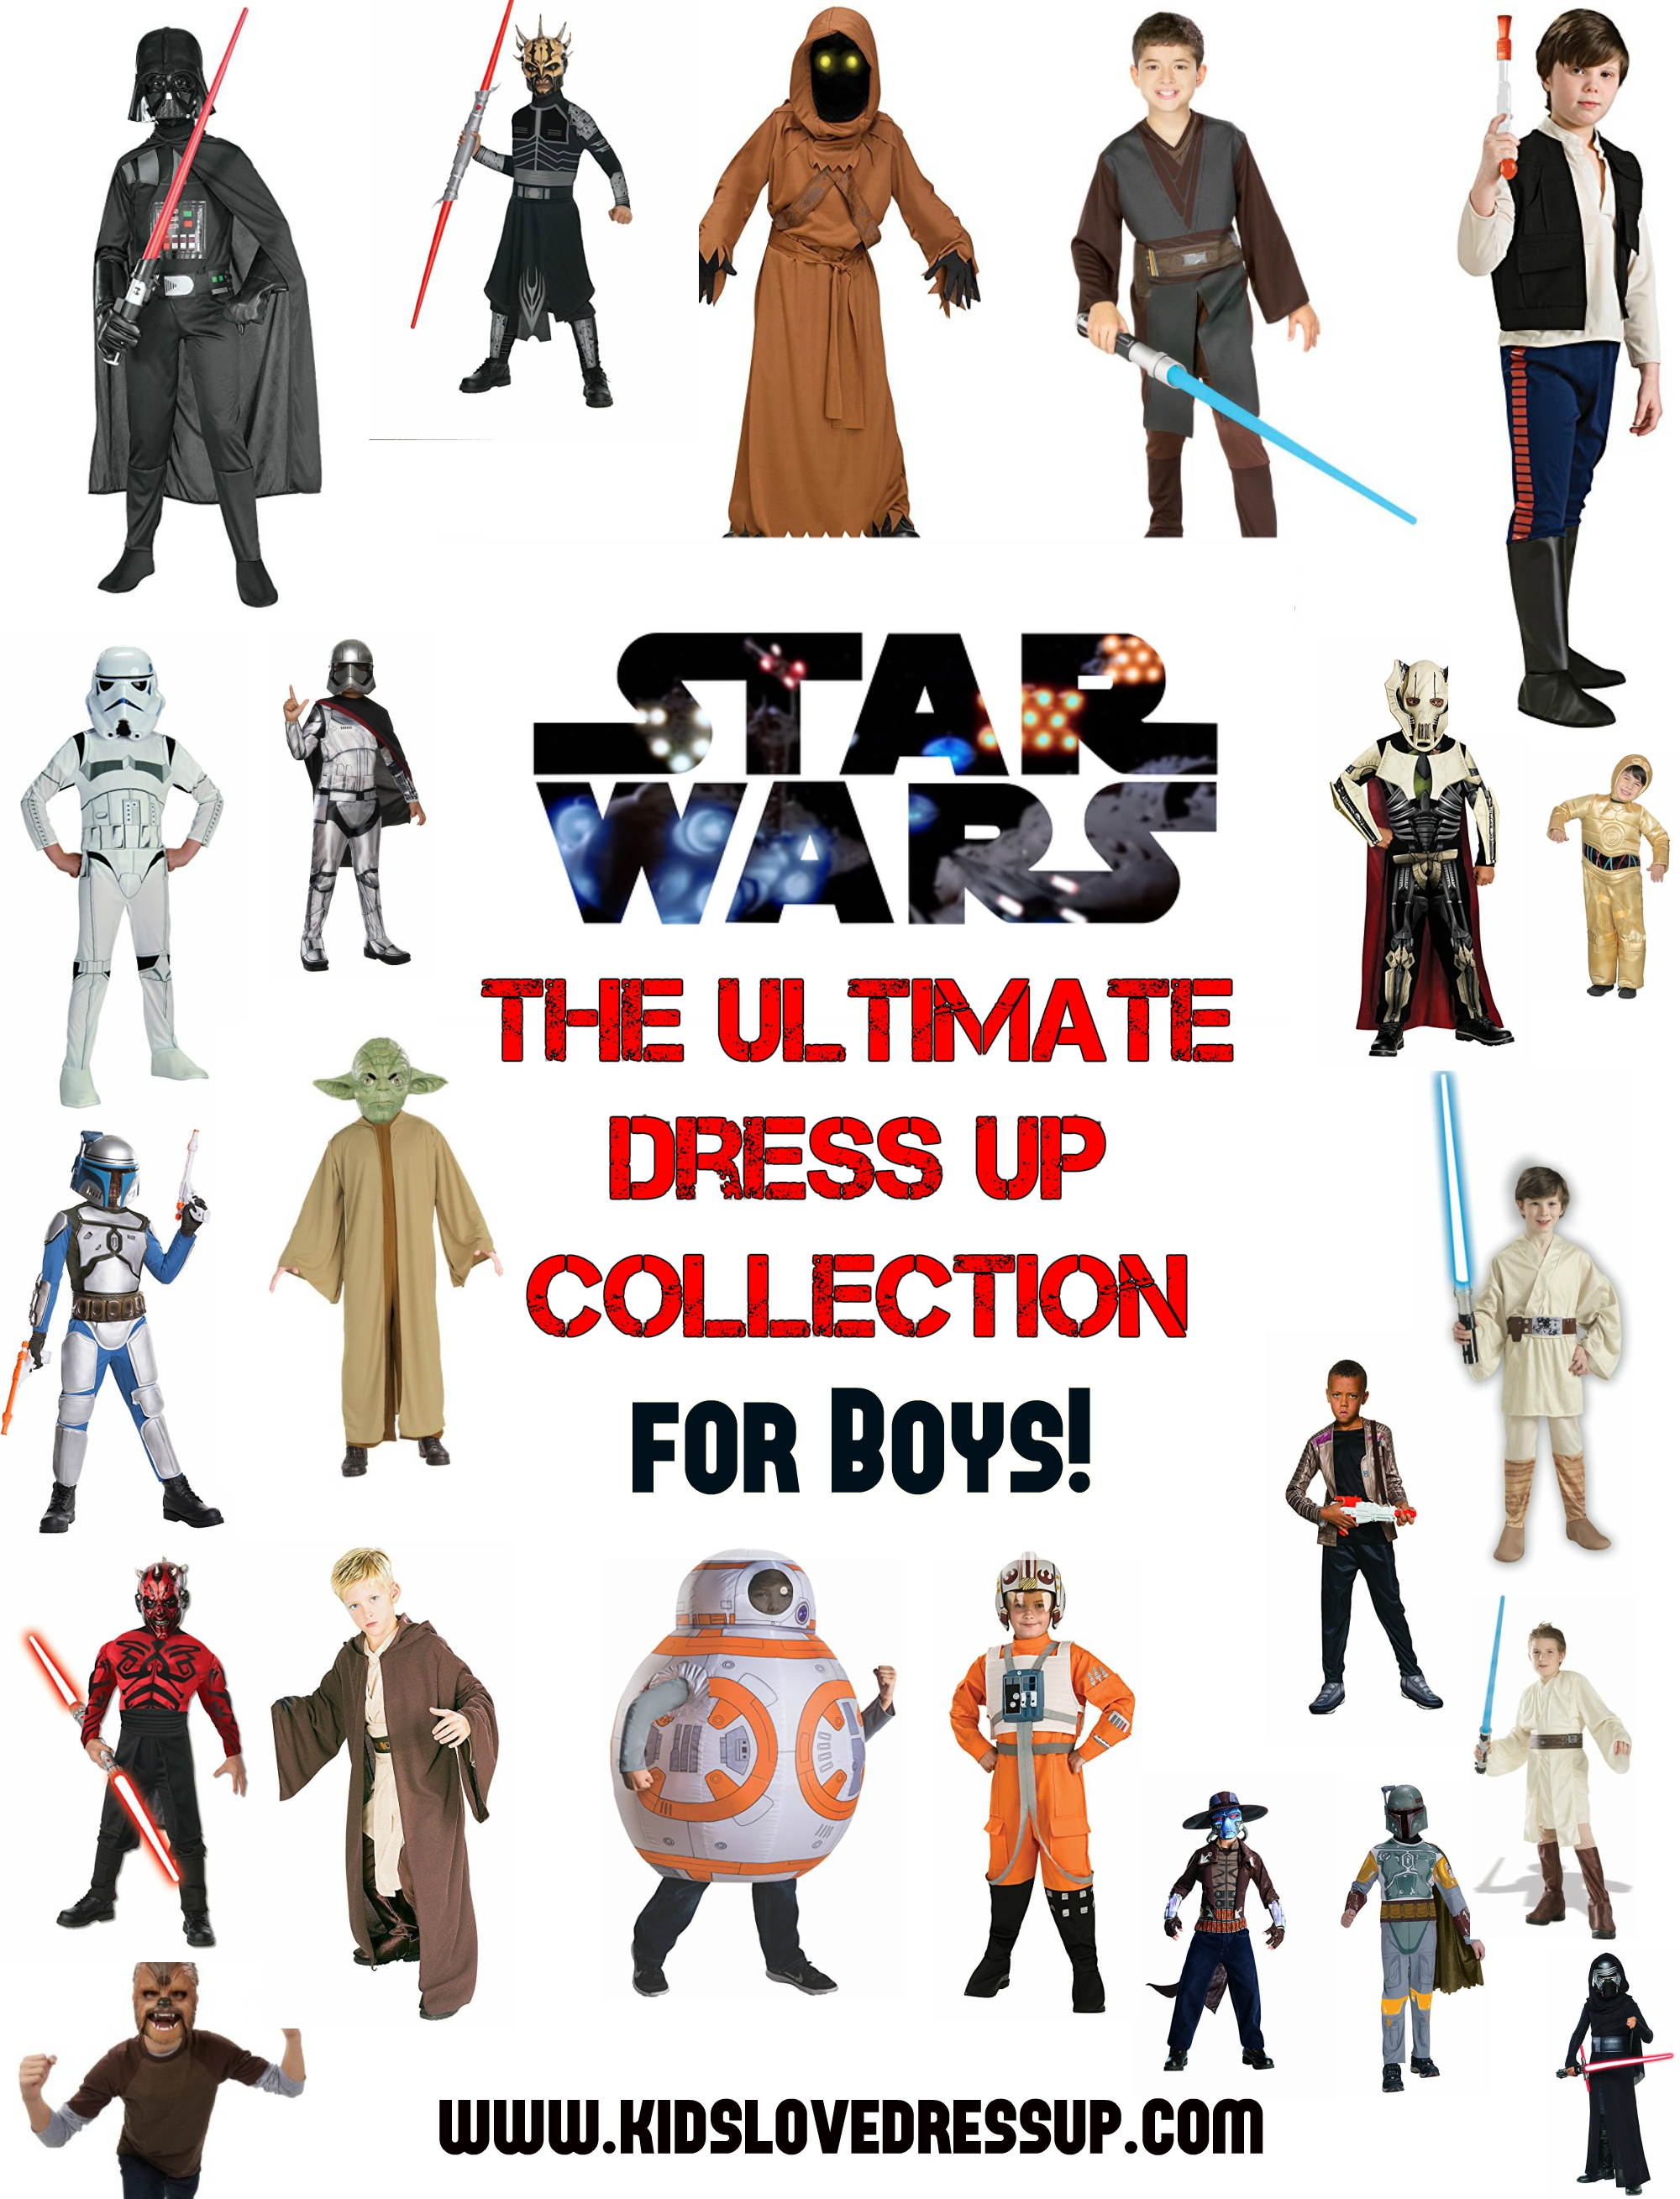 Star Wars Dress Up For Boys - The Ultimate Costume Collection for the young Star Wars lover in your life! Check out the huge variety of kid sized Star Wars Costumes at www.kidslovedressup.com!